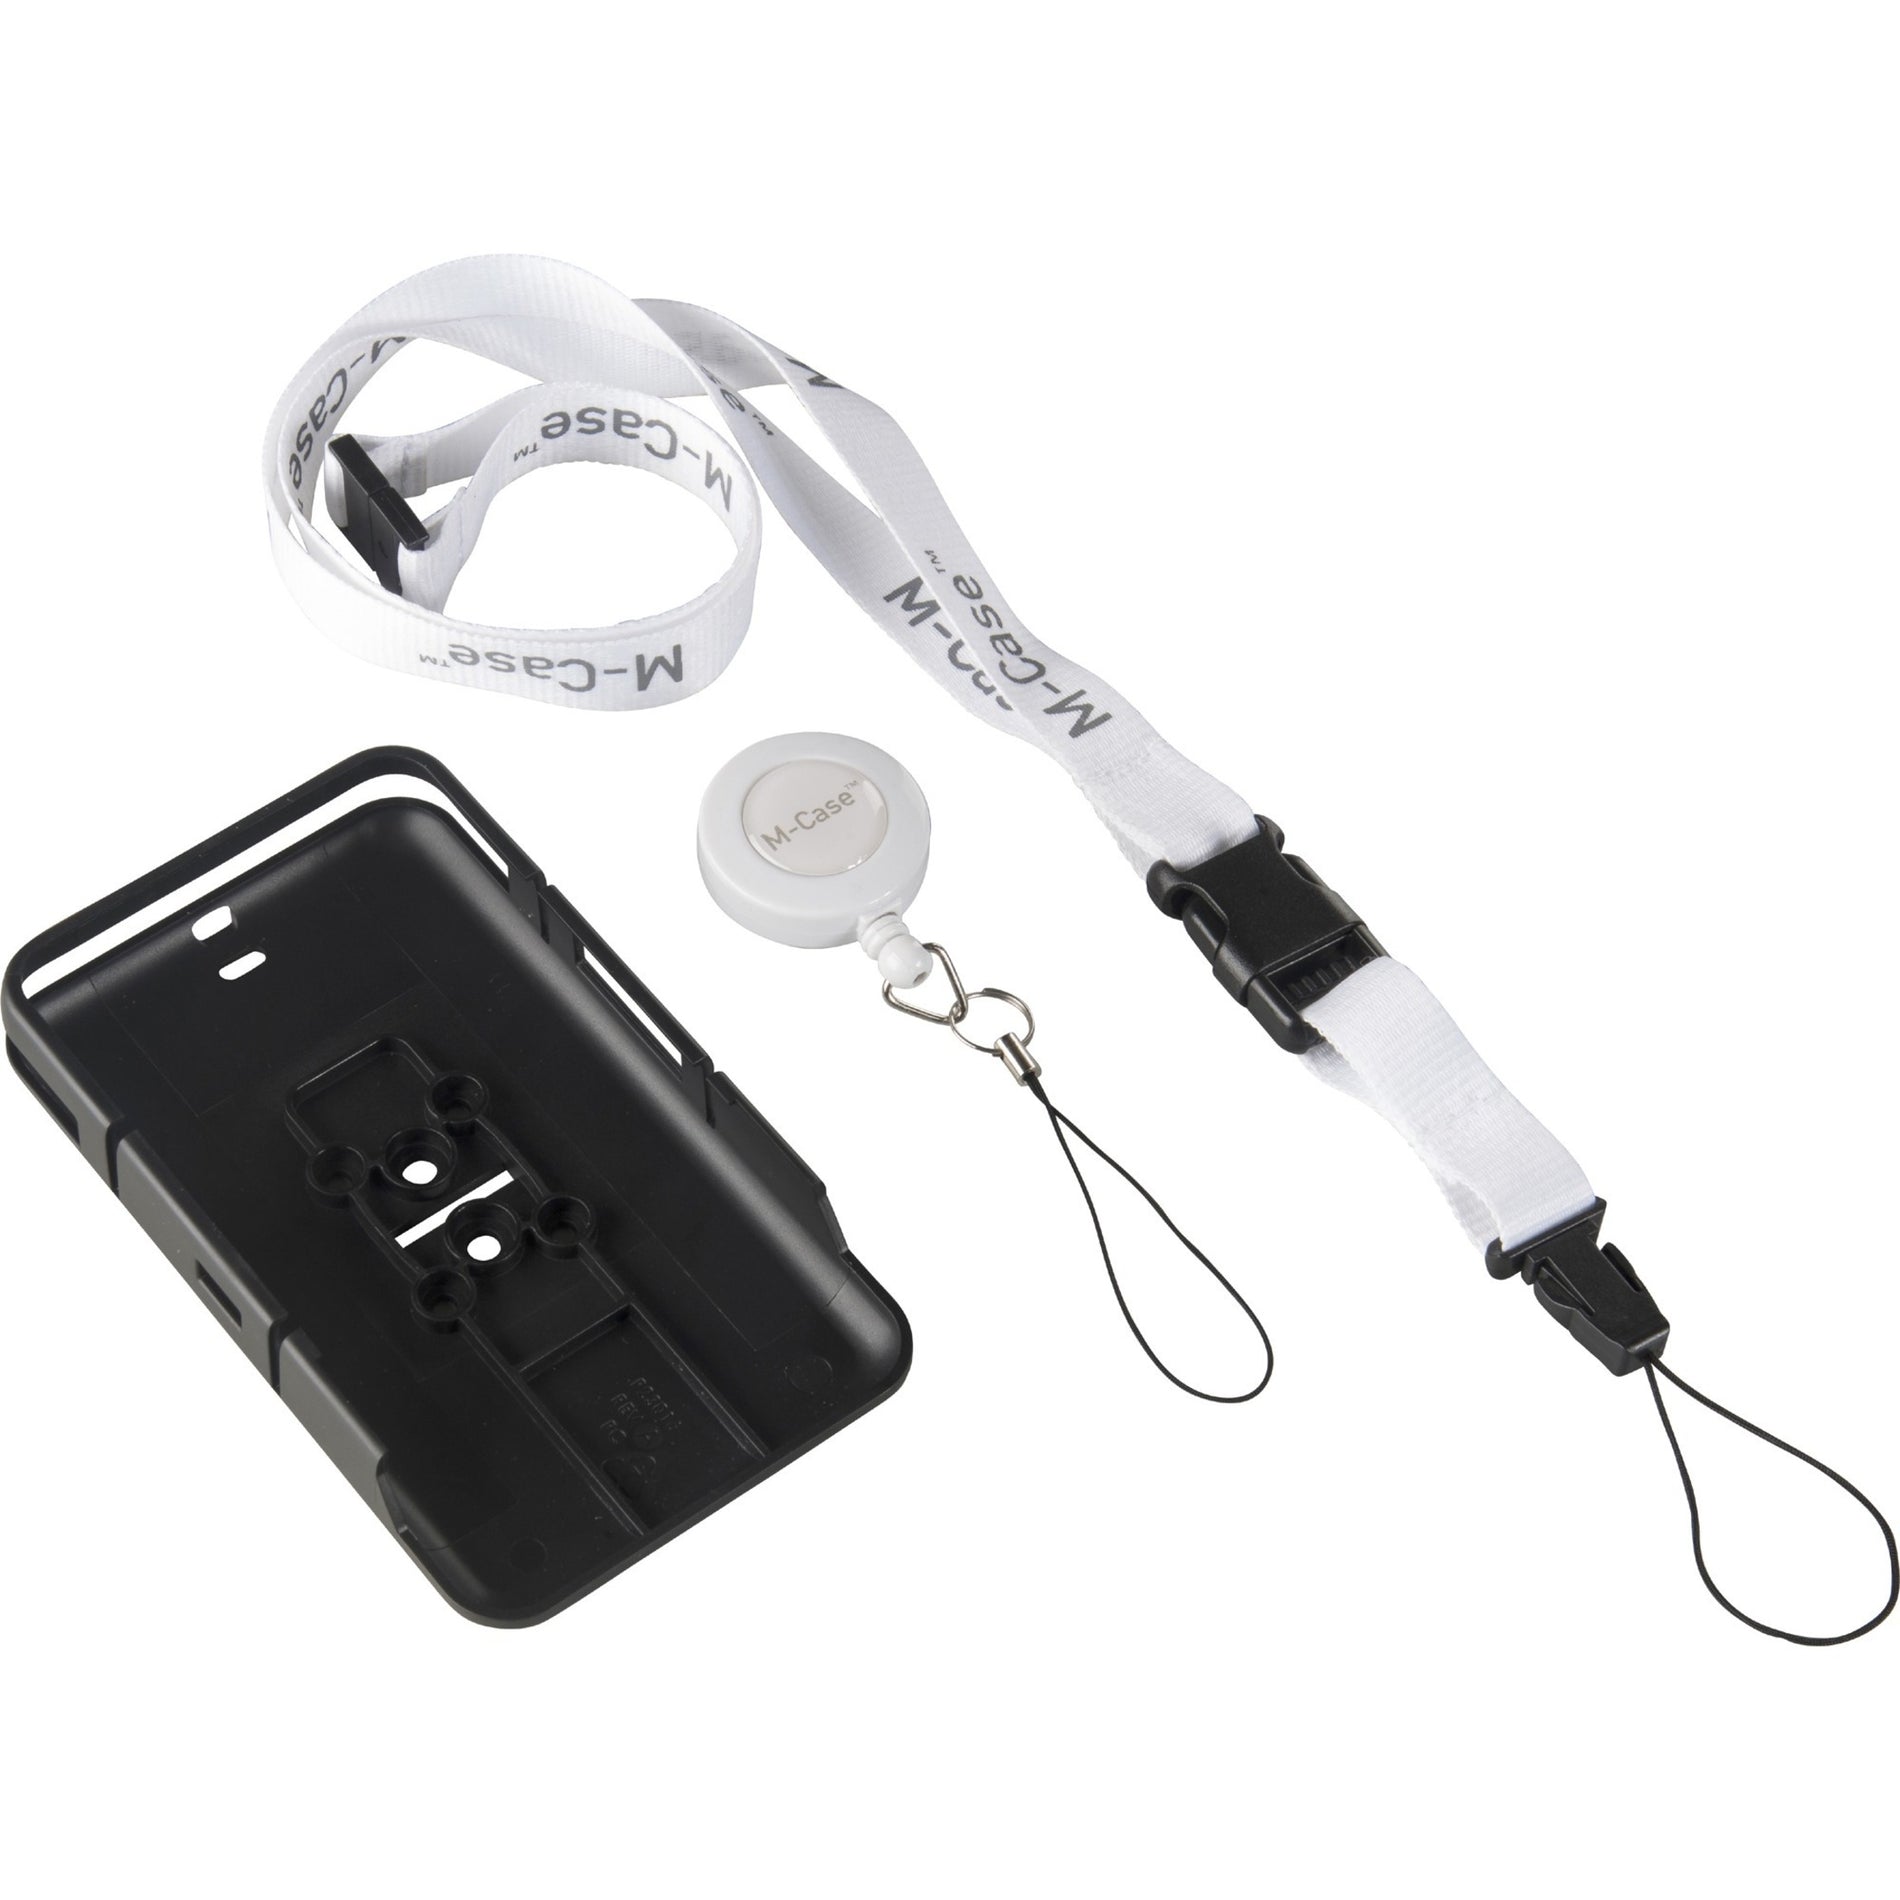 SpacePole SPMC105-02 M-Case Mobile Payment Solution, Black Carrying Case with Lanyard and Retractable Cable